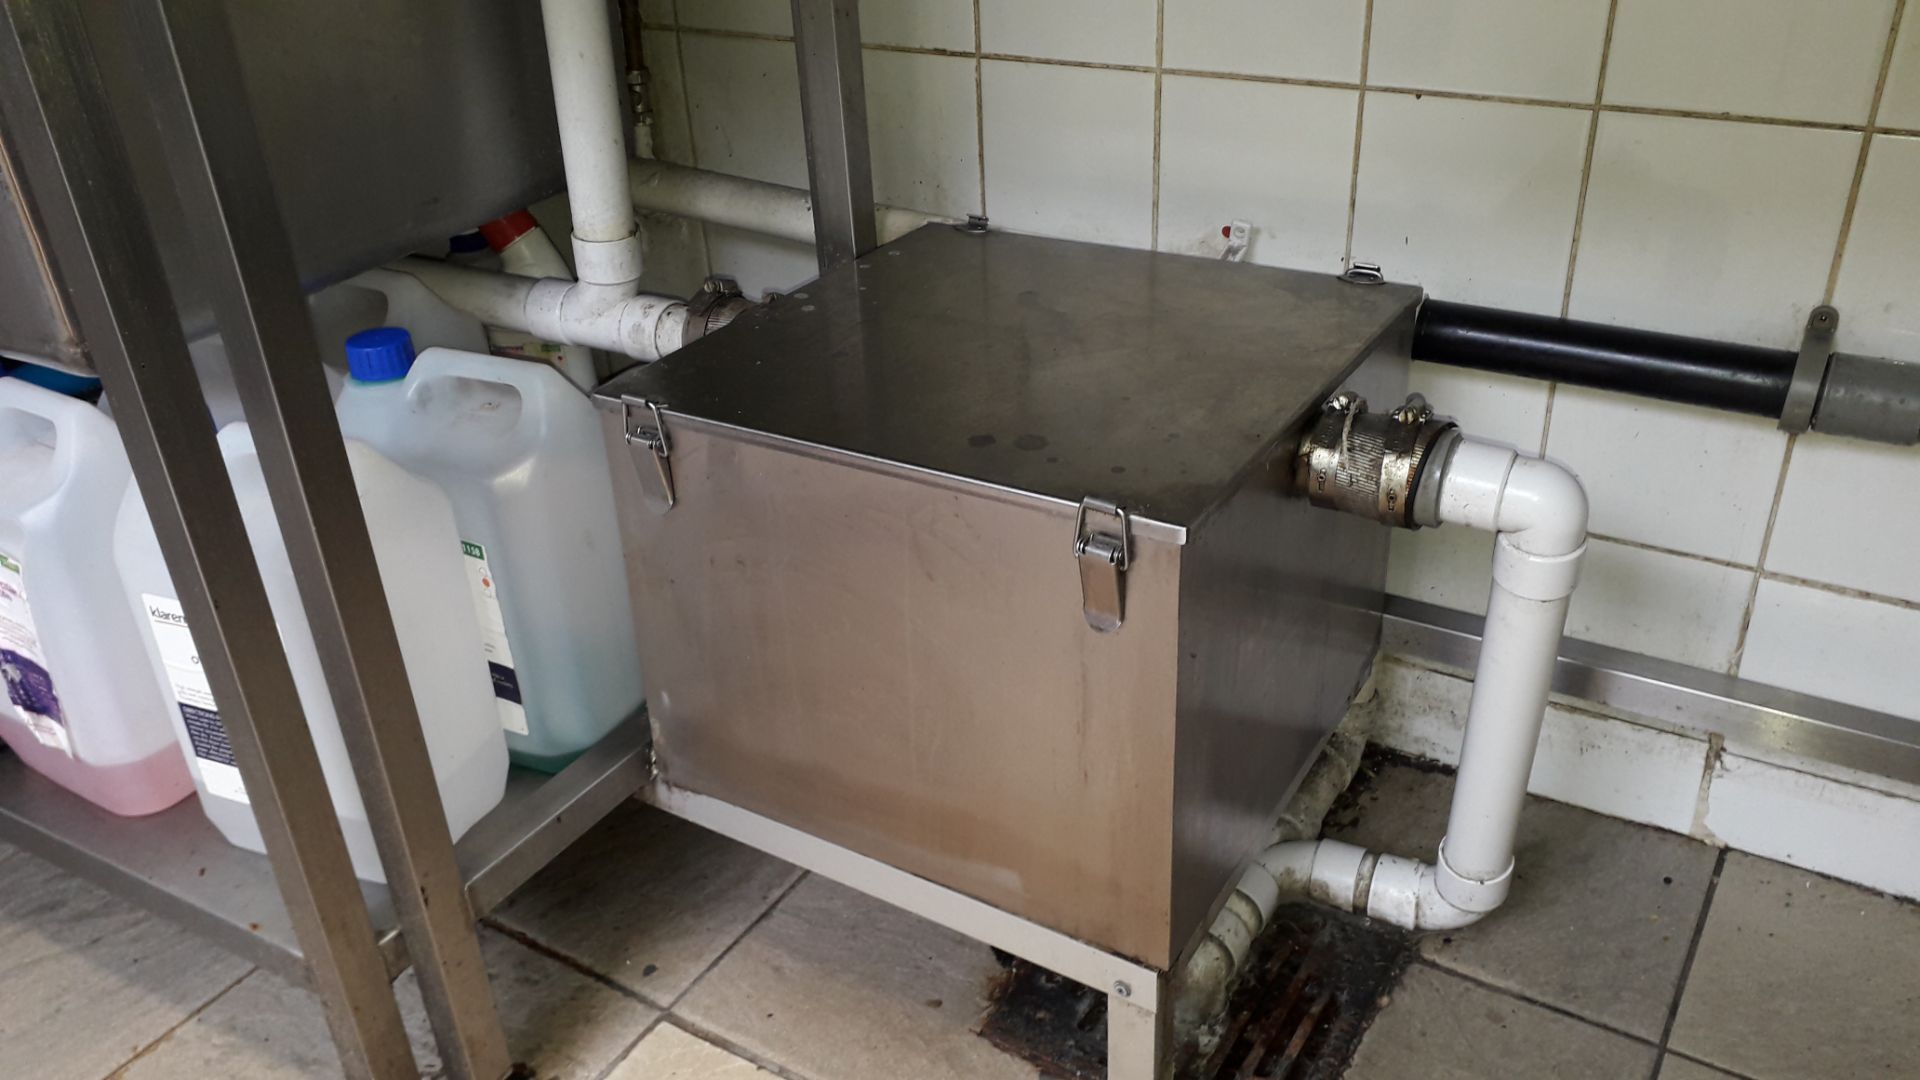 Hoonved CAP7E11 Pass Through Dishwasher Serial Number GB1803890318 with Feed Table, fitted Sink with - Image 8 of 9